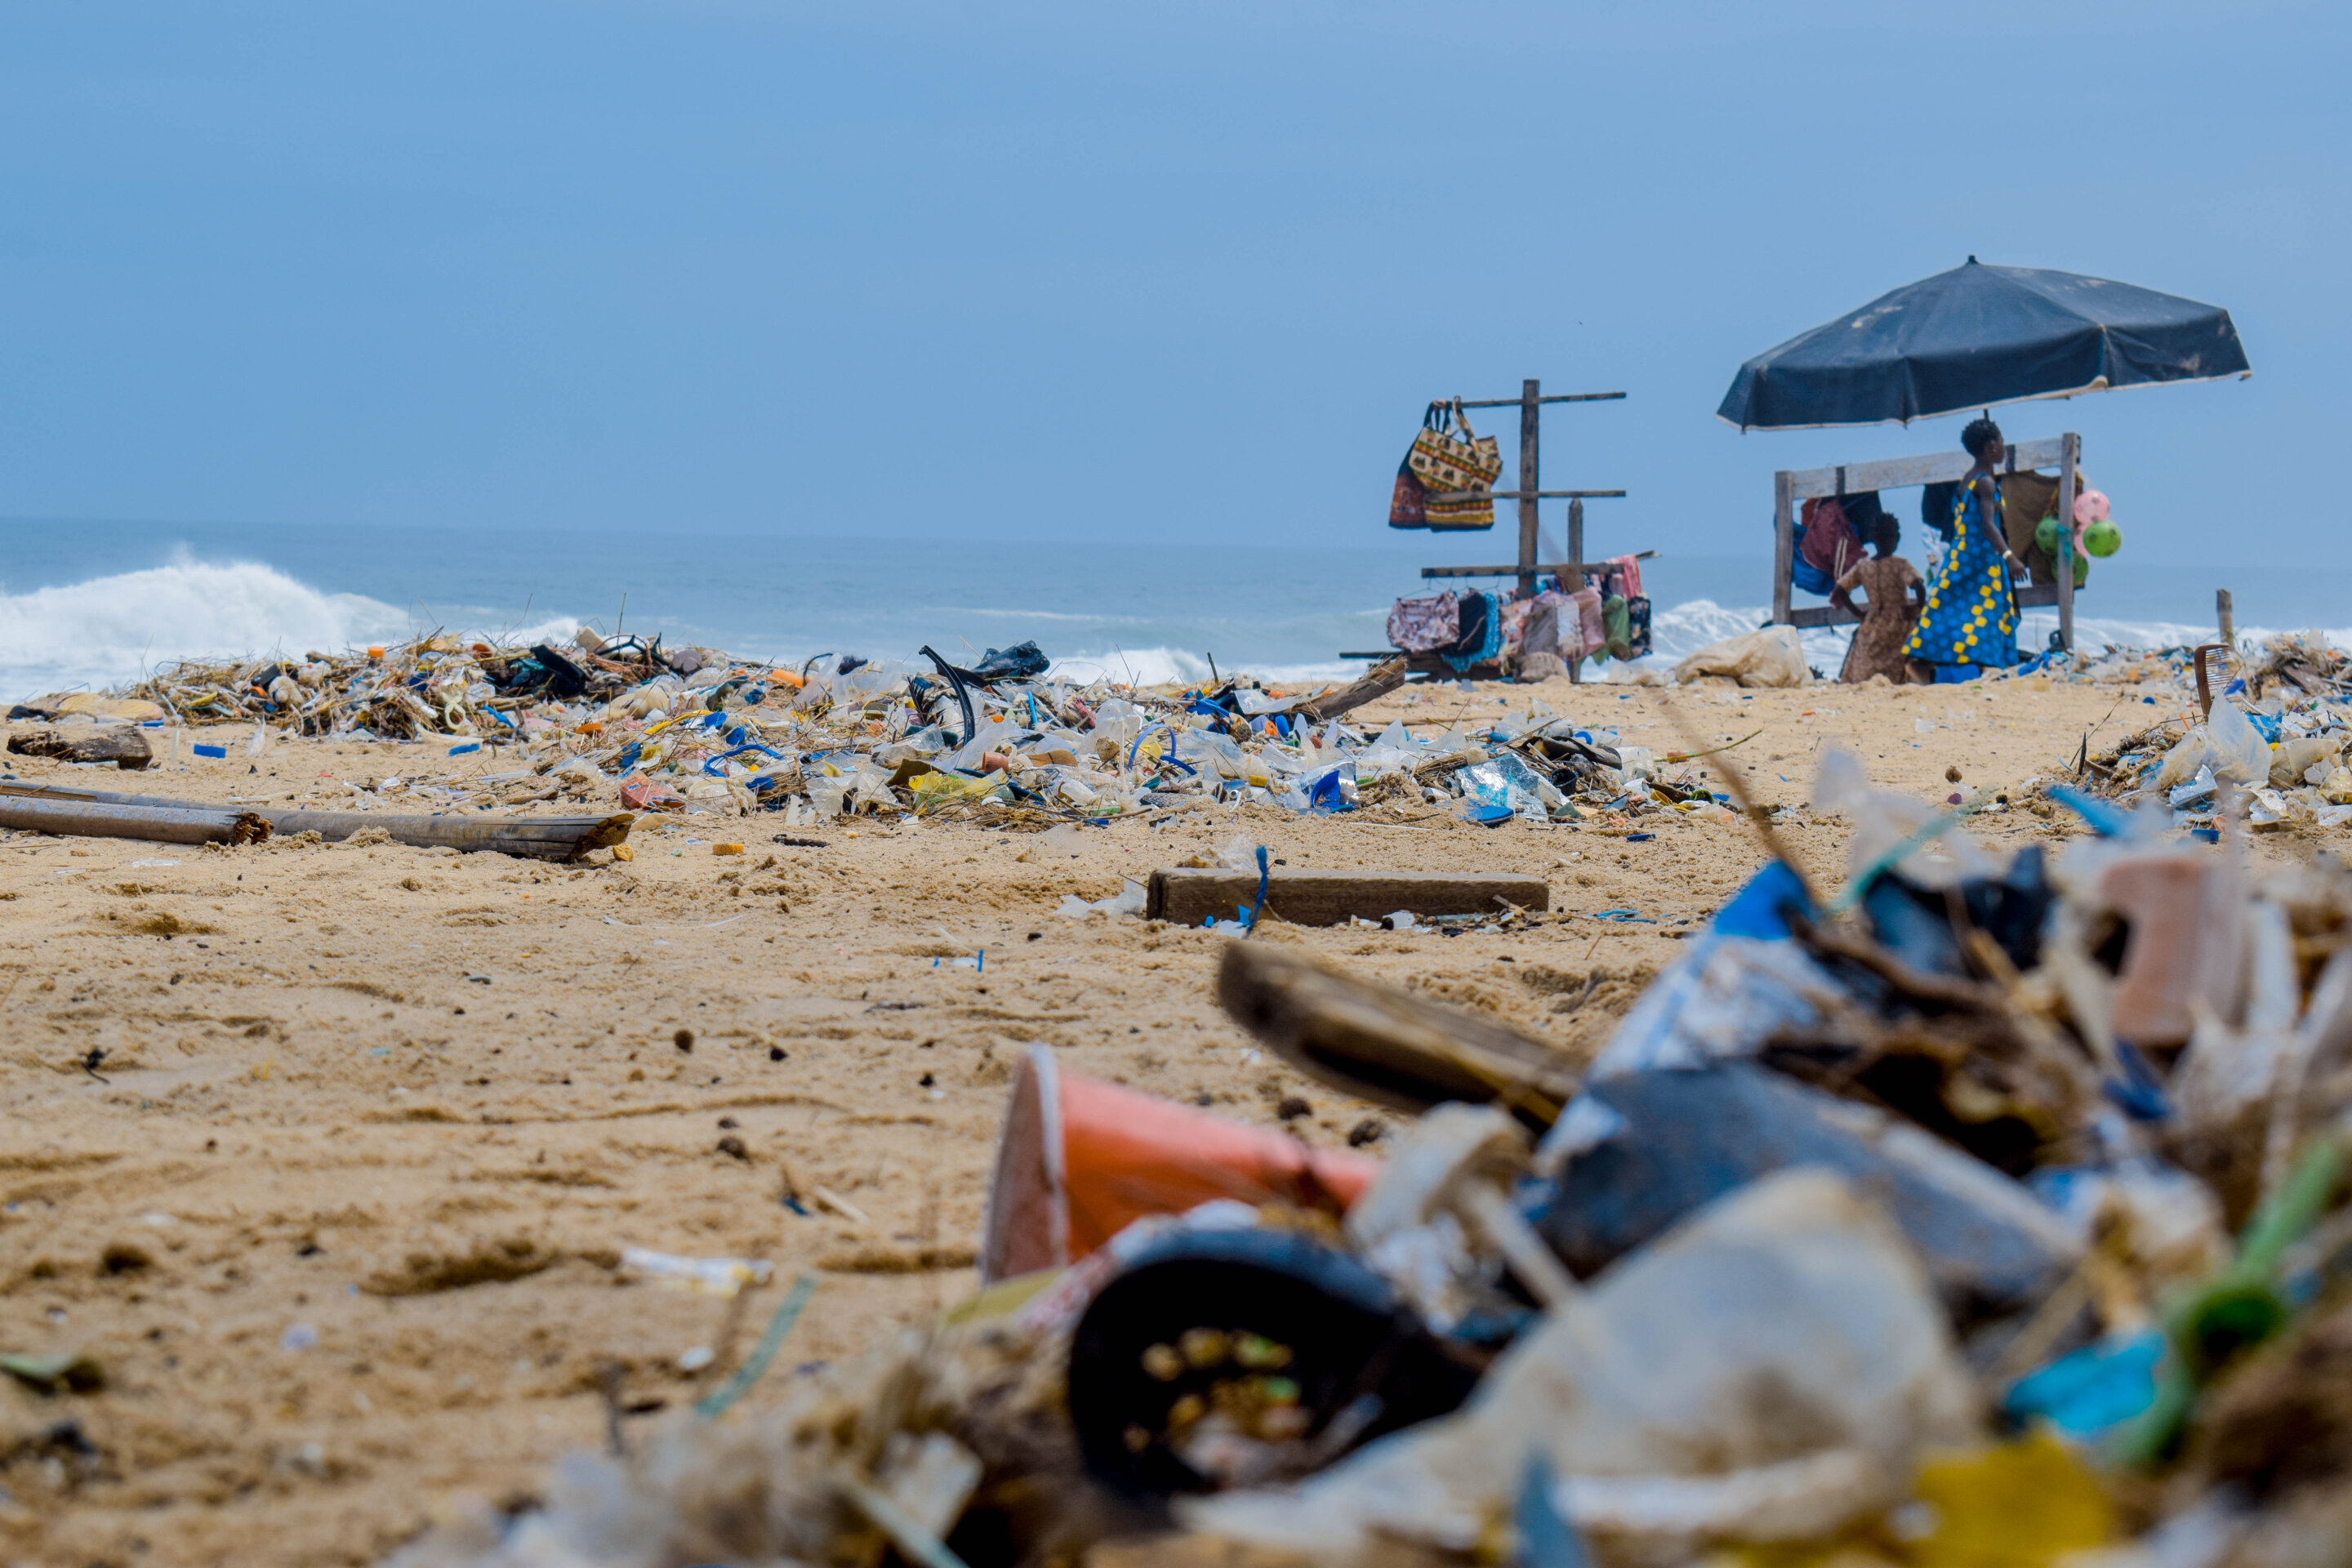 #Plastic waste is a resource that doesn’t have to end up in the oceans